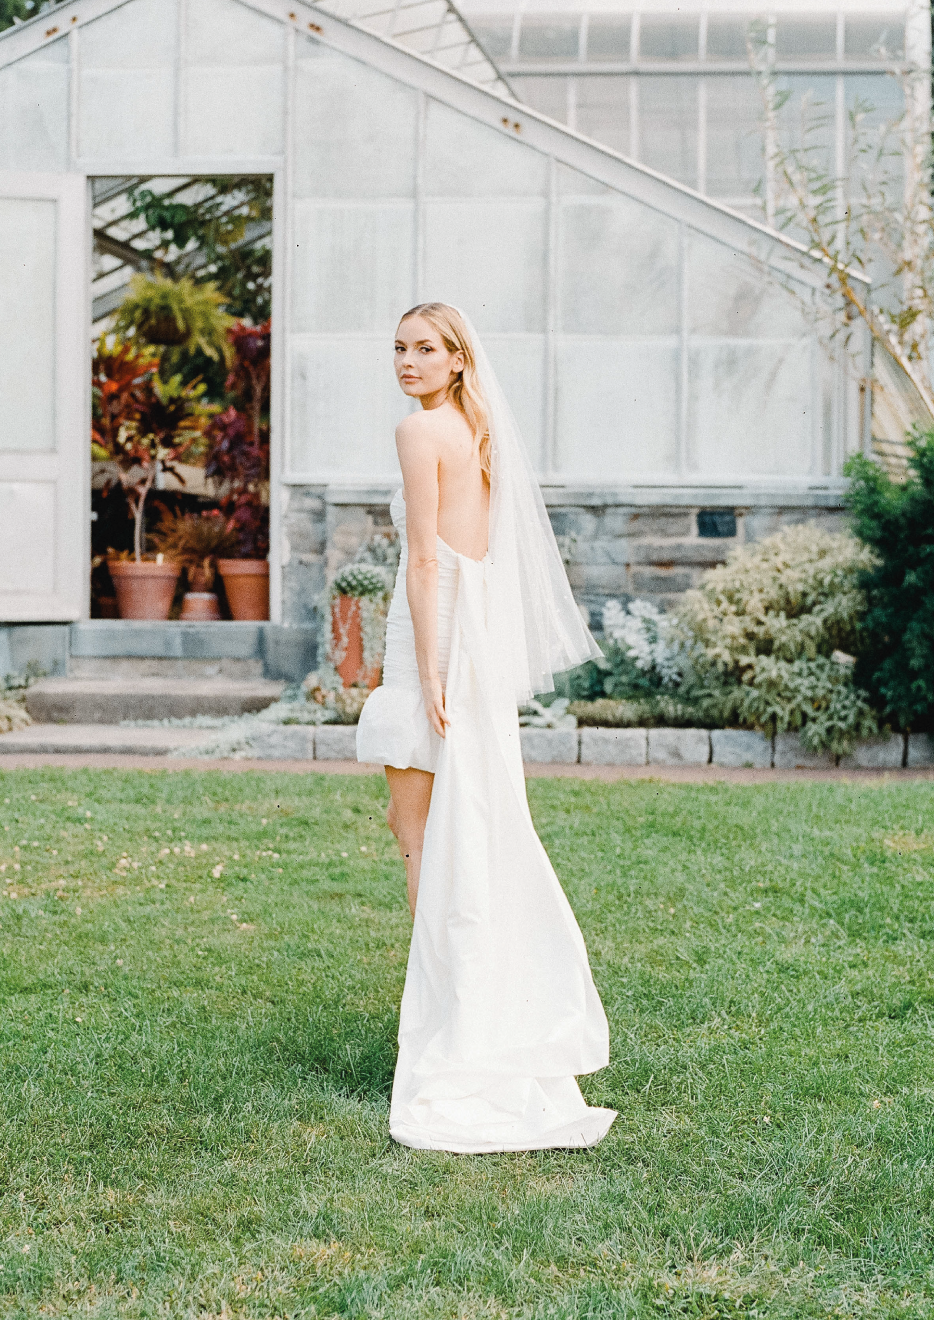 Wedding dress model Grace - Dress in Strapless style ruched body with puffy hem and detachable train - Verdin New York